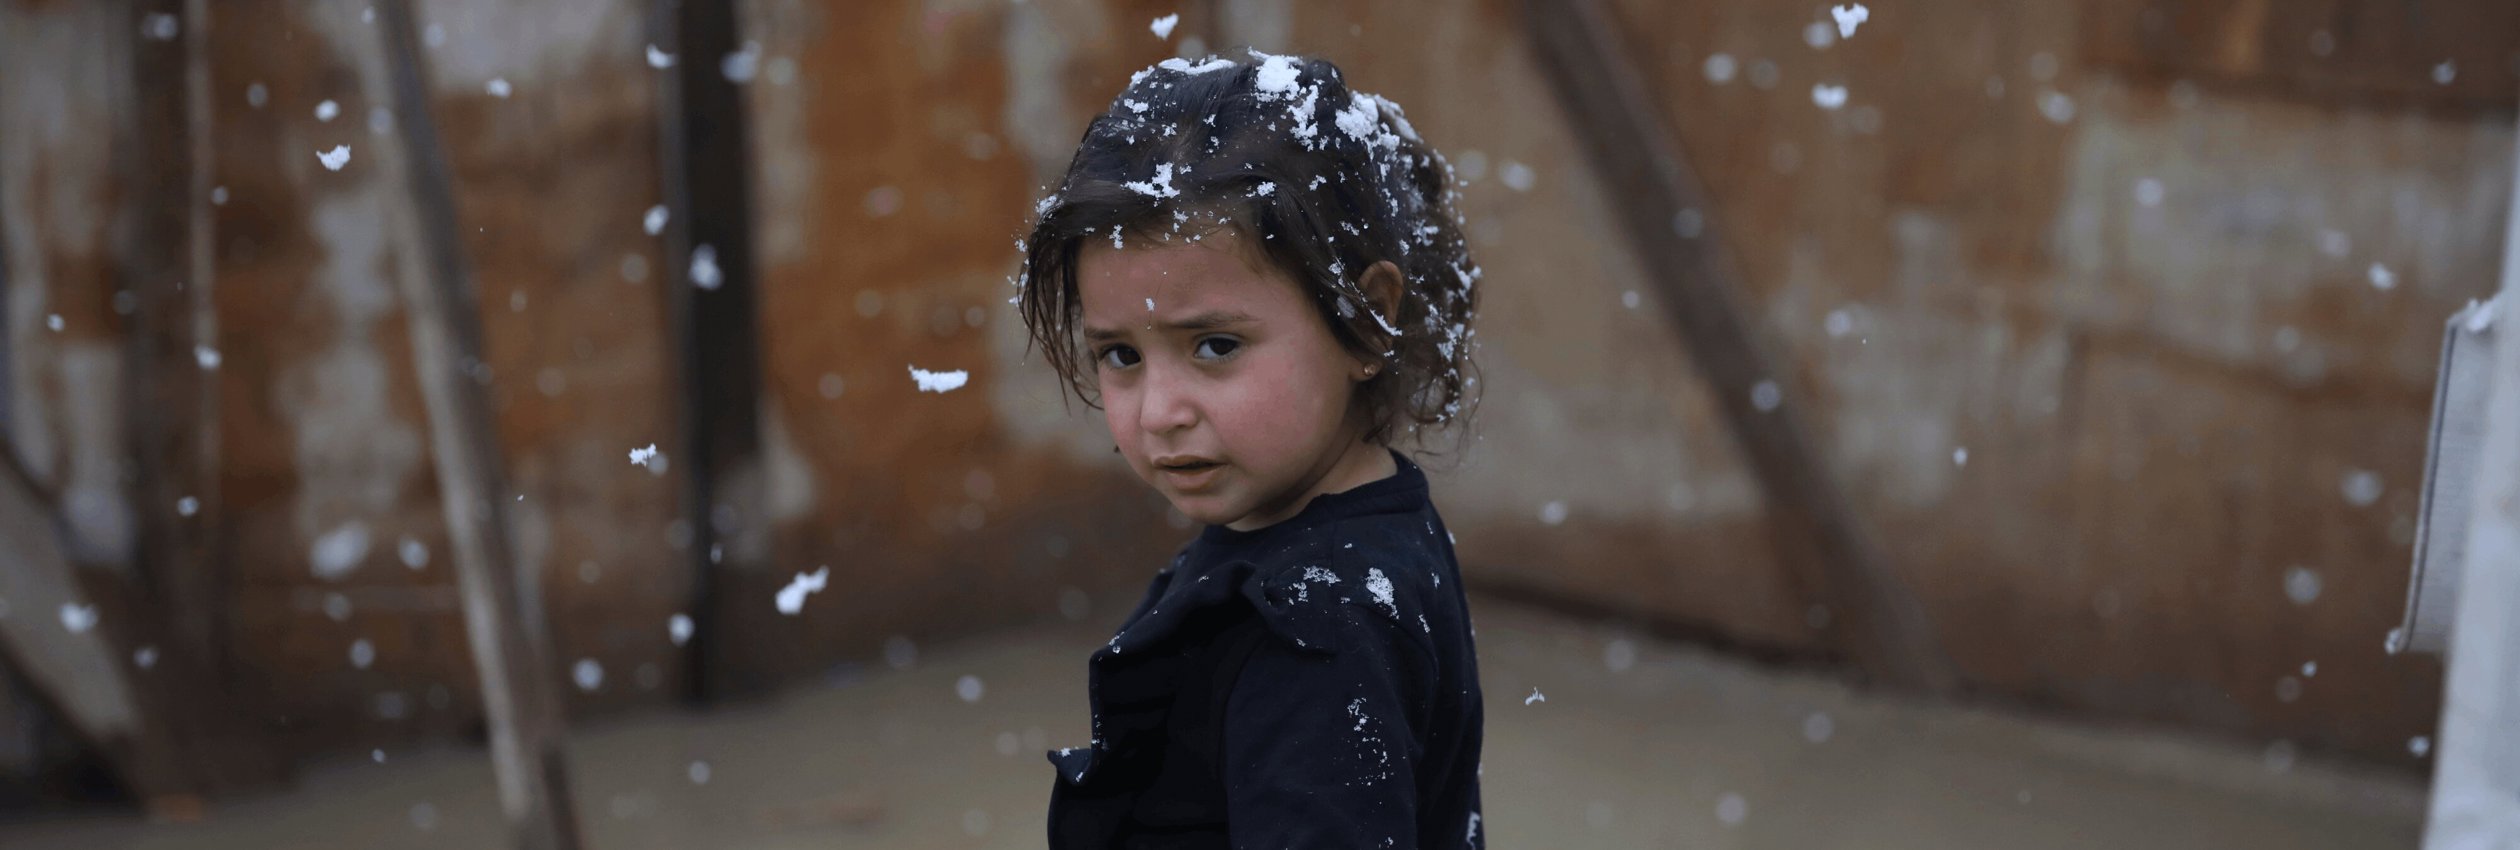 Aisha, a young Syrian girl, stands outside her family's tent in Lebanon while snow falls around her.